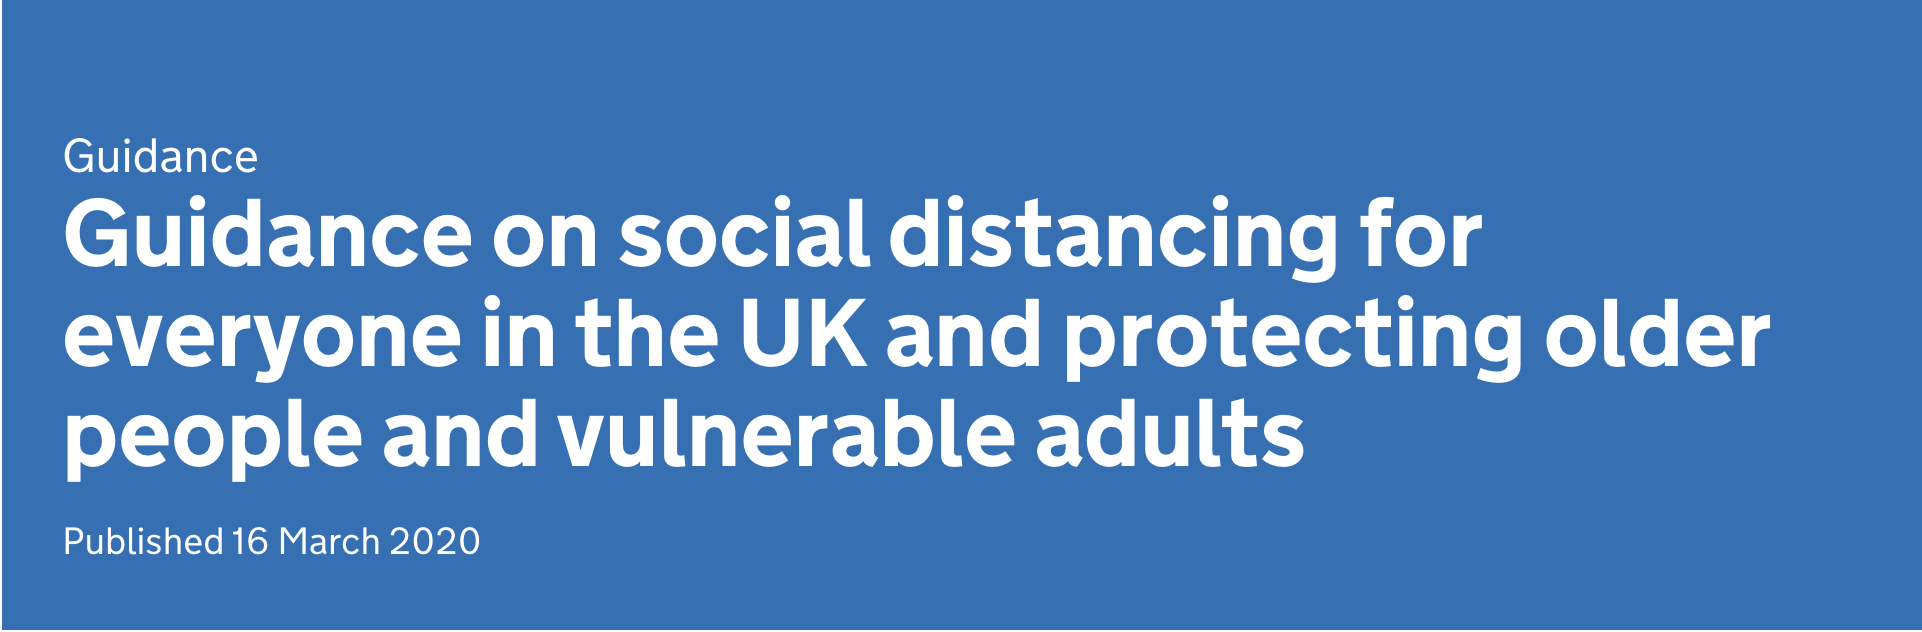 COVID-19 - Guidance on Social Distancing for Vulnerable People (16th March)